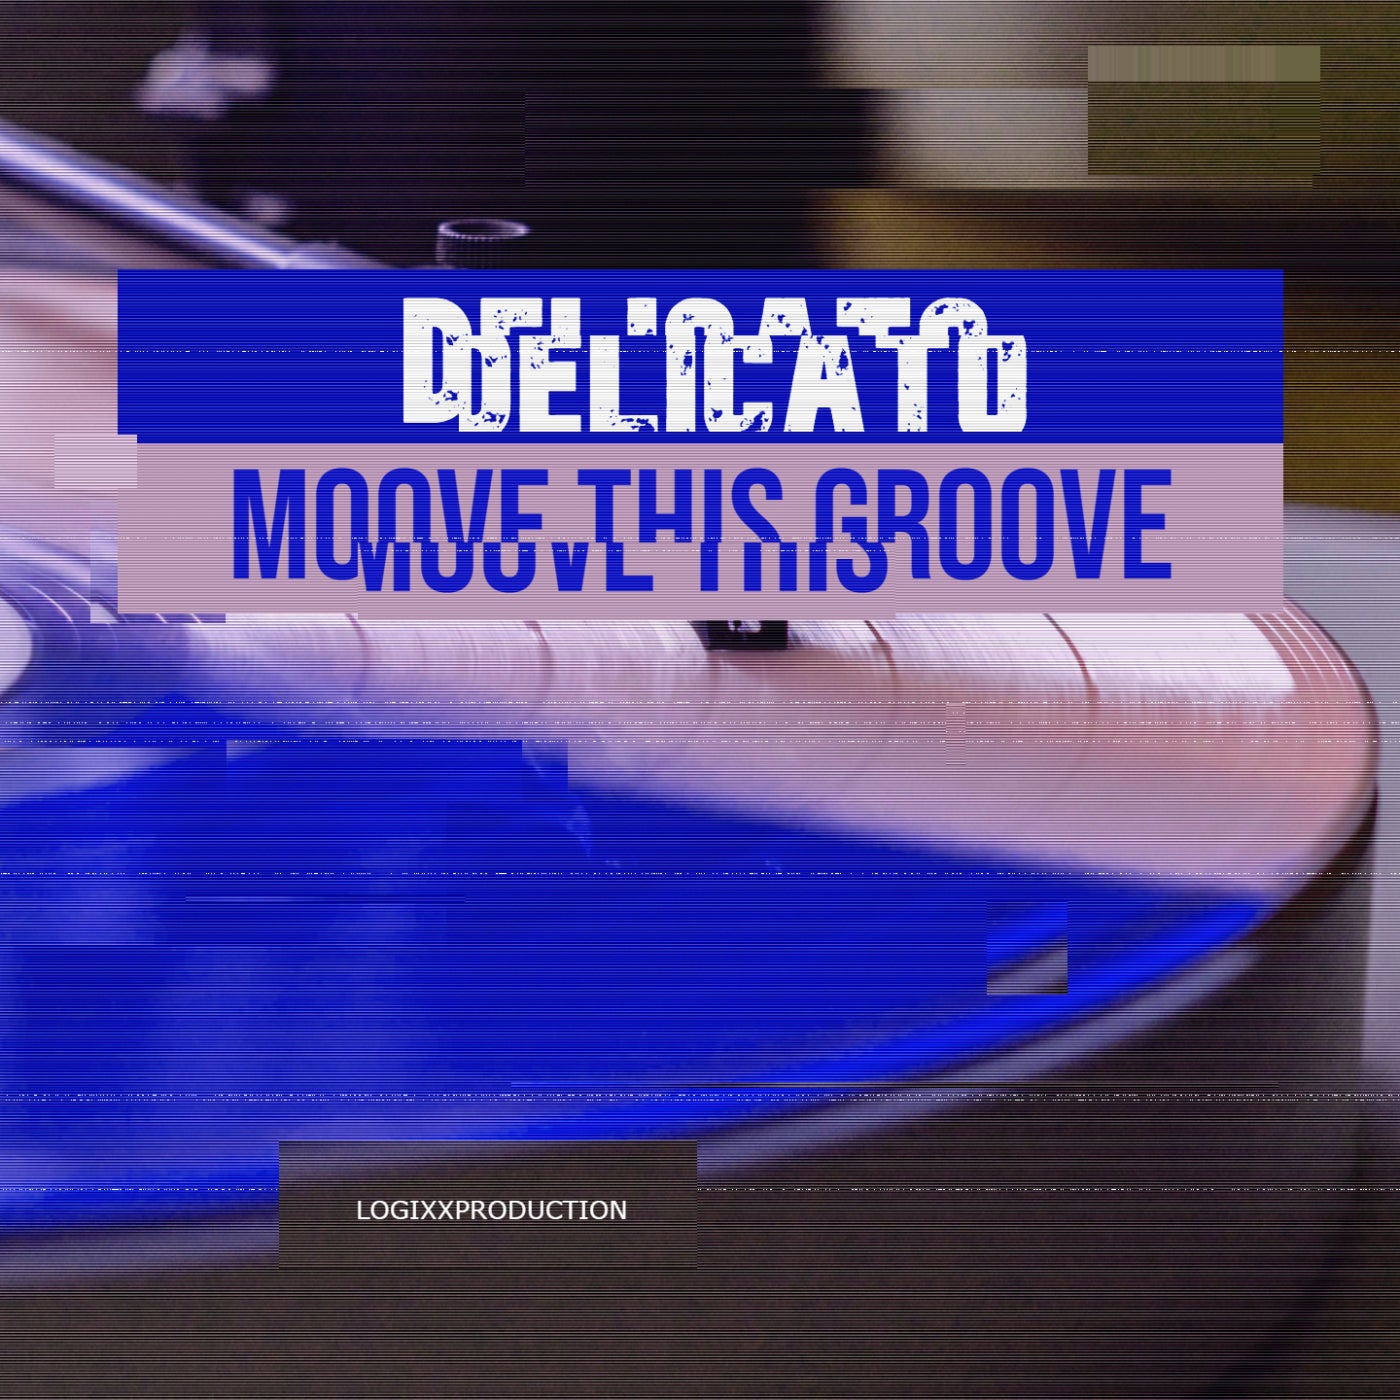 Moove This Groove